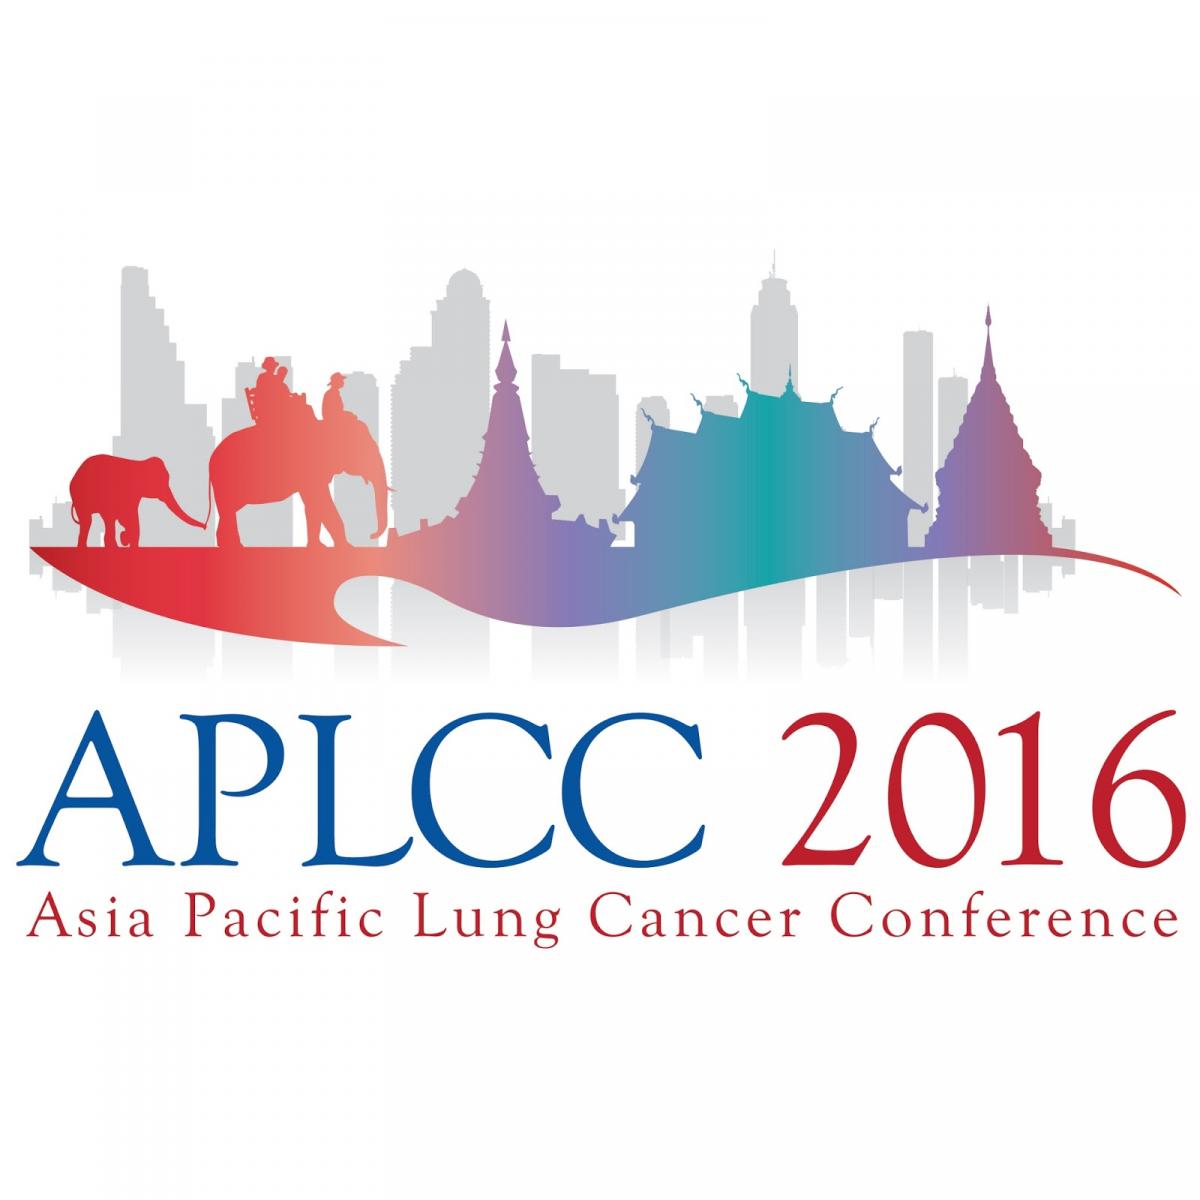 APLCC 2016 in Thailand: Preventing lung cancer is public health imperative